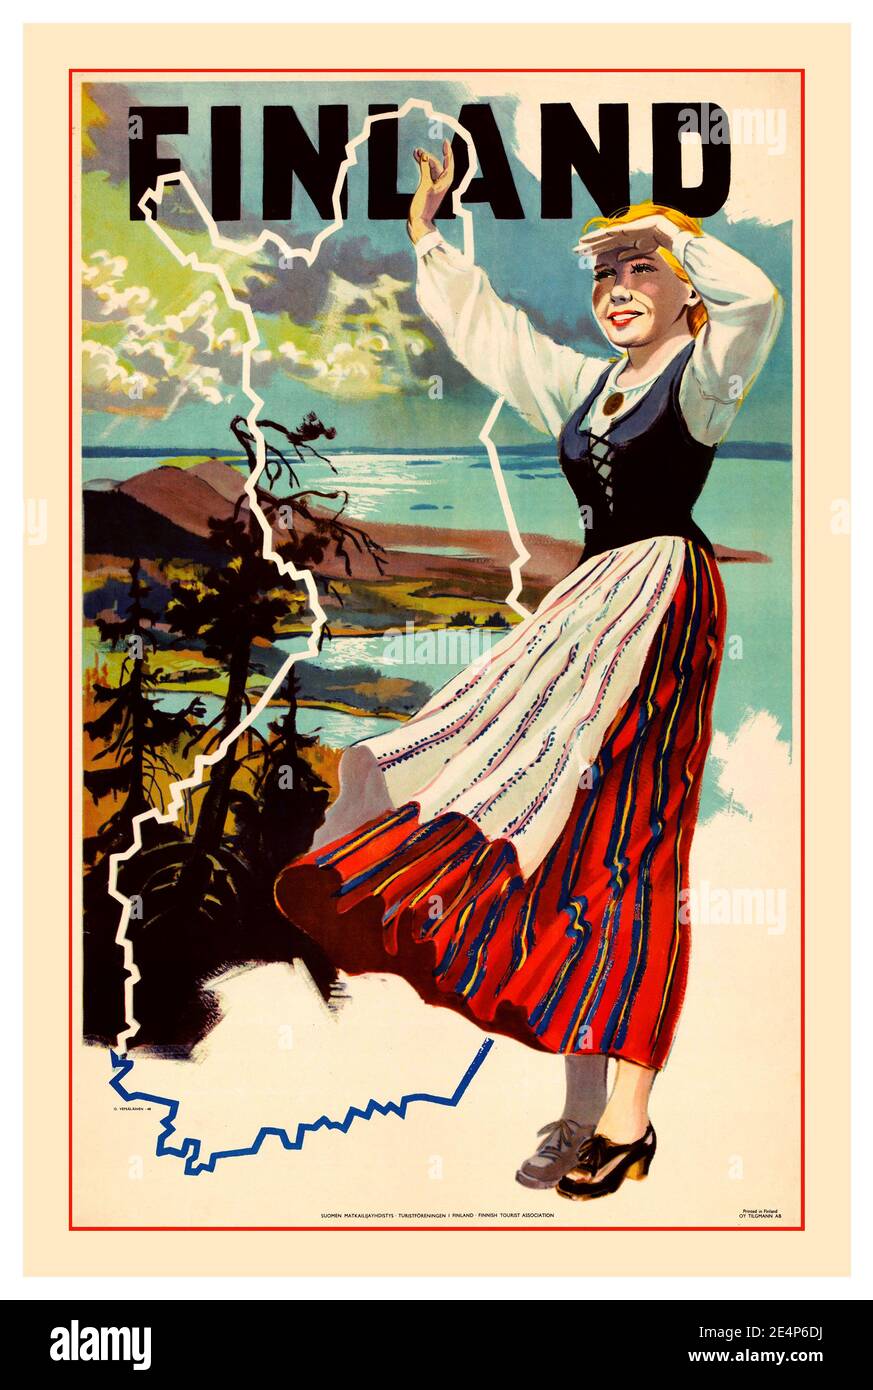 FINLAND Vintage 1940's retro travel poster with Finnish blond girl in  traditional national folk country dress with map & archipelago islands  illustration behind Stock Photo - Alamy